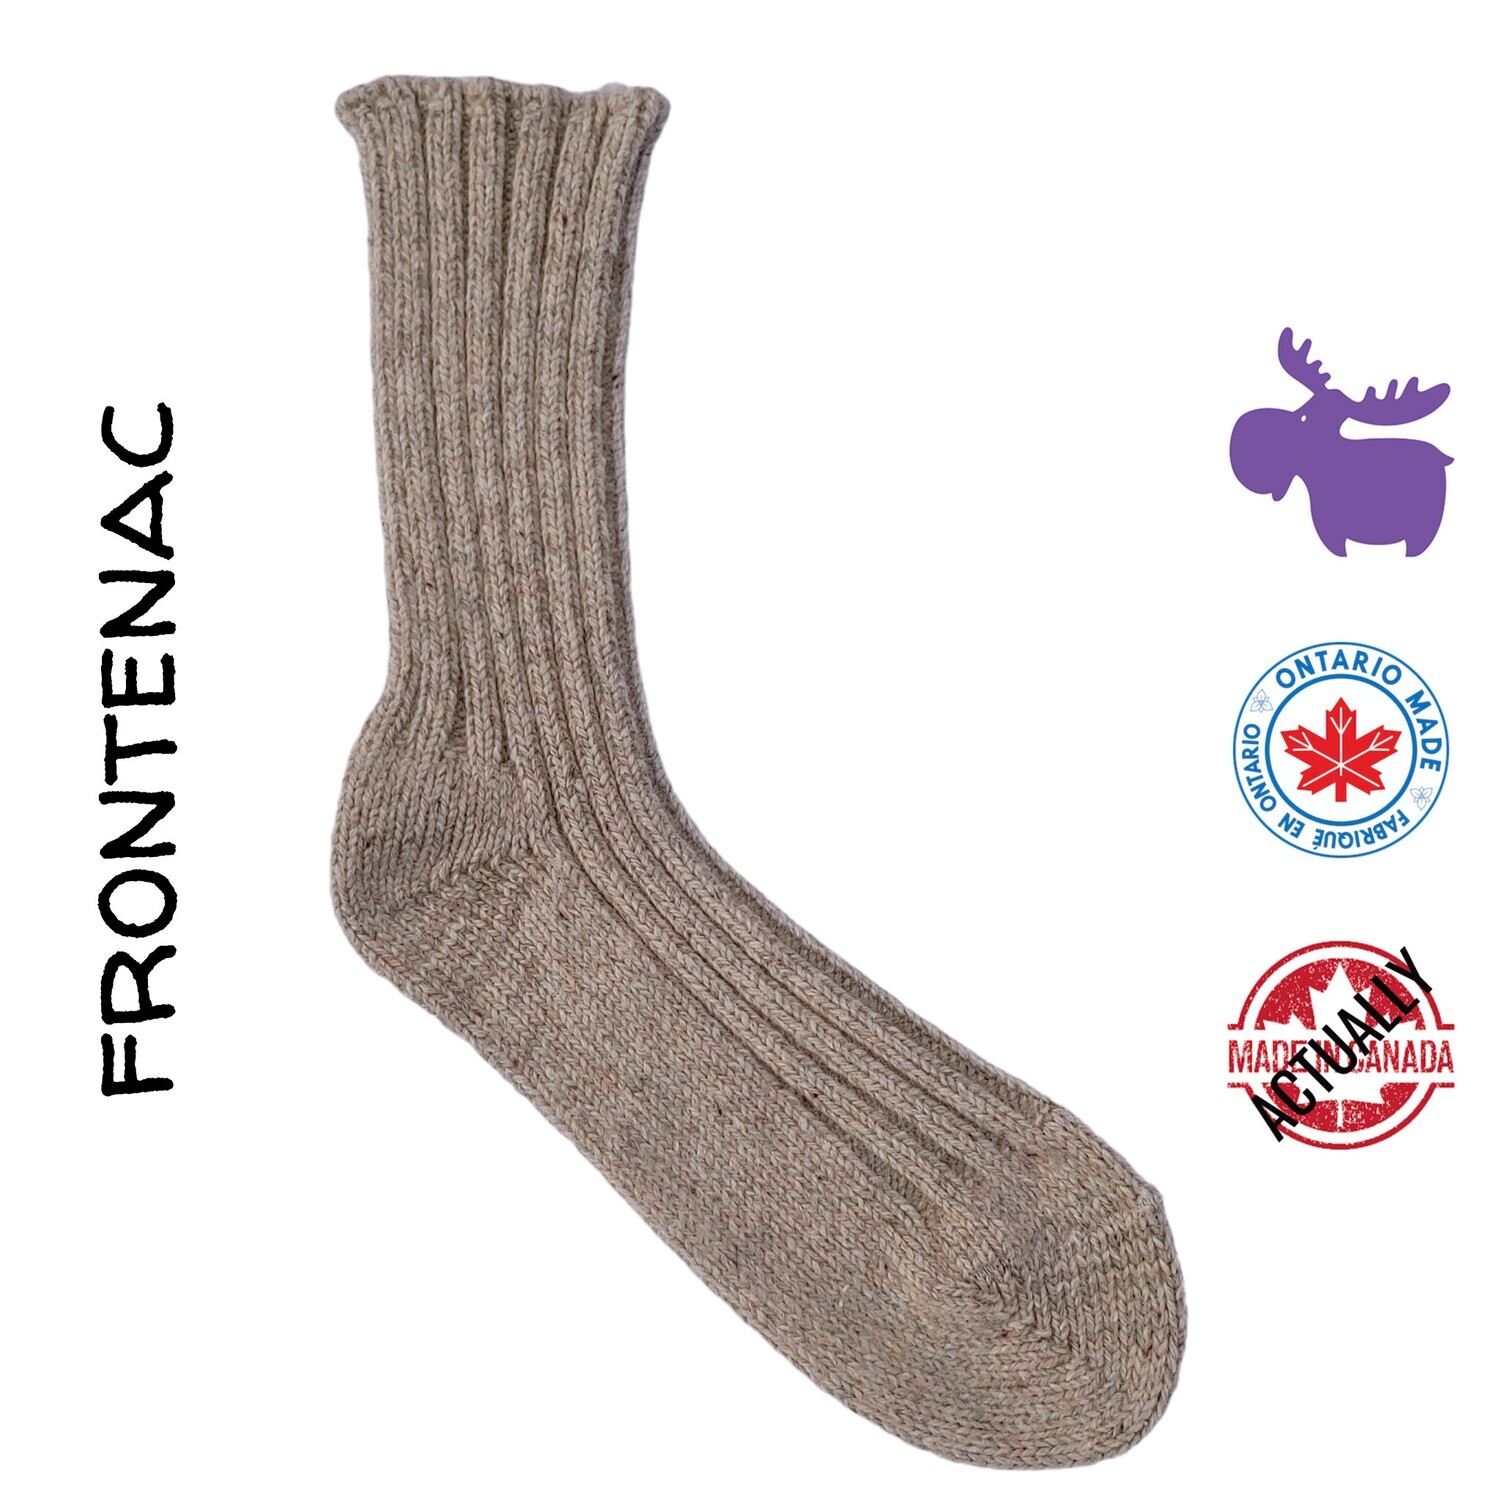 Frontenac Cotton/Wool Boot Sock in Oatmeal | One Size Fits Most | Actually Made in Canada by Purple Moose